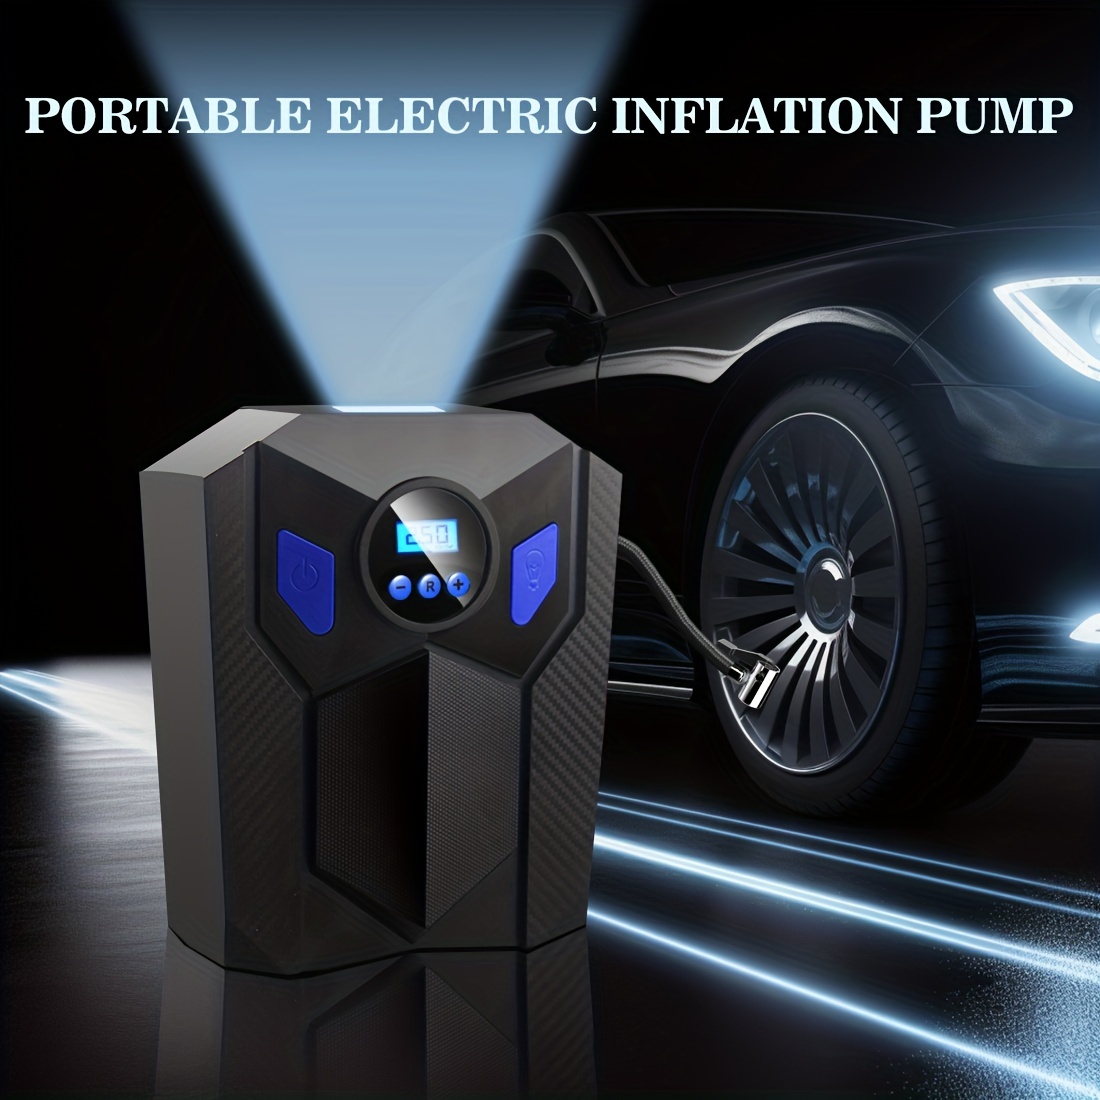 Car mounted wireless inflation pump Car portable inflation pump Electric  car tire inflation pump for inflation